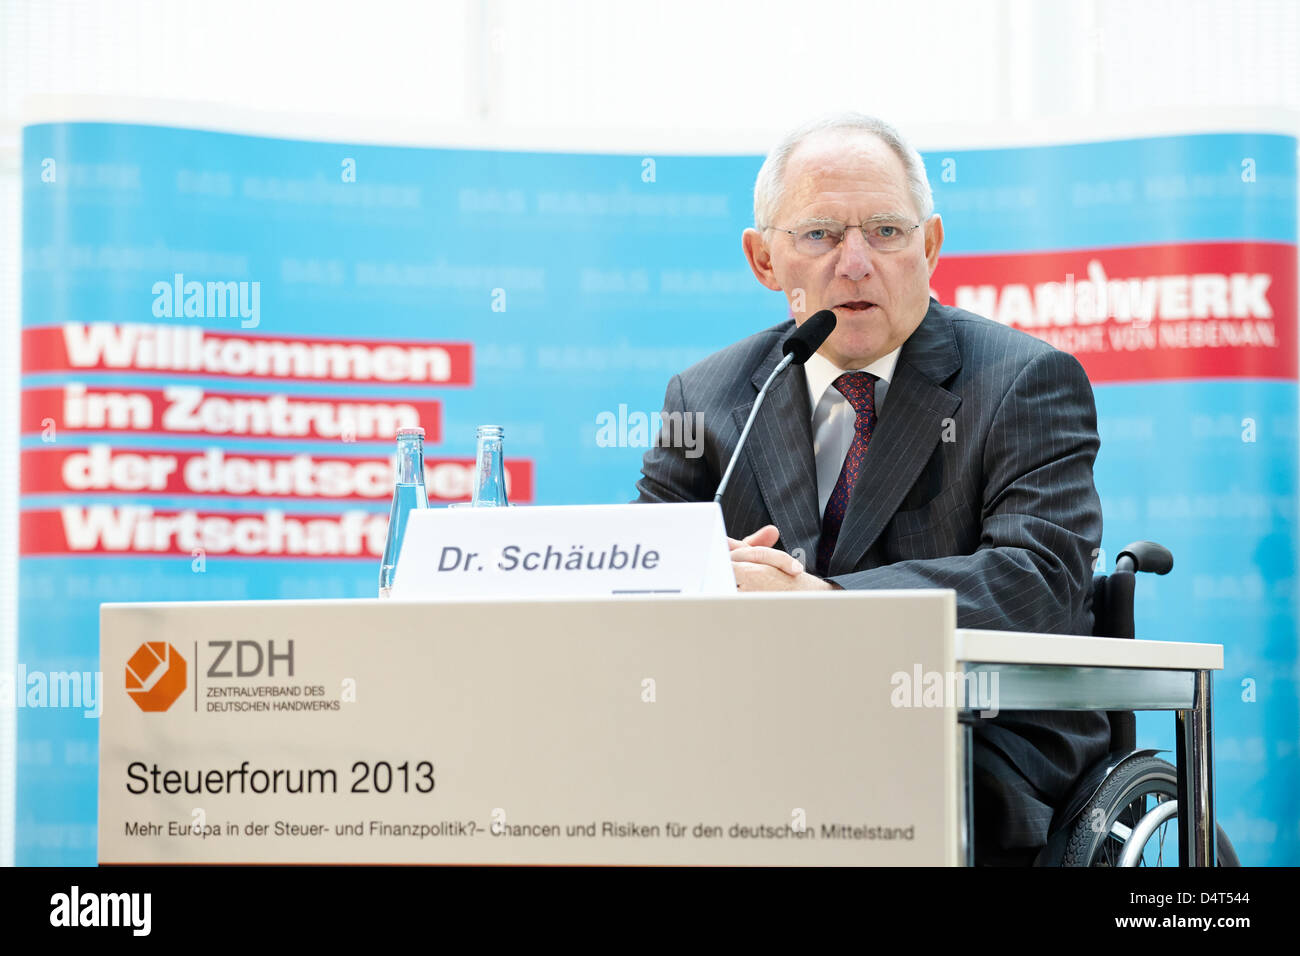 Wolfgang Schaeuble (CDU), Federal Minister of Finance, speaks at the ZDH-Tax Forum 2013 in Berlin./ Berlin, 18 March 2013. Representatives of the Federal Government, the German Parliament, the European Commission and the courts discuss the challenges of fiscal policy in Europe and the focus of tax policy in the 18th Discuss legislative session at The German Confederation of Skilled Crafts ZDH-Tax Forum 2013 on 'More Europe in the tax and fiscal policy?' The speakers are Wolfgang Schaeuble, Federal Minister of Finance, Heinz Zourek, Director General for Taxation and Customs Union of the Europea Stock Photo